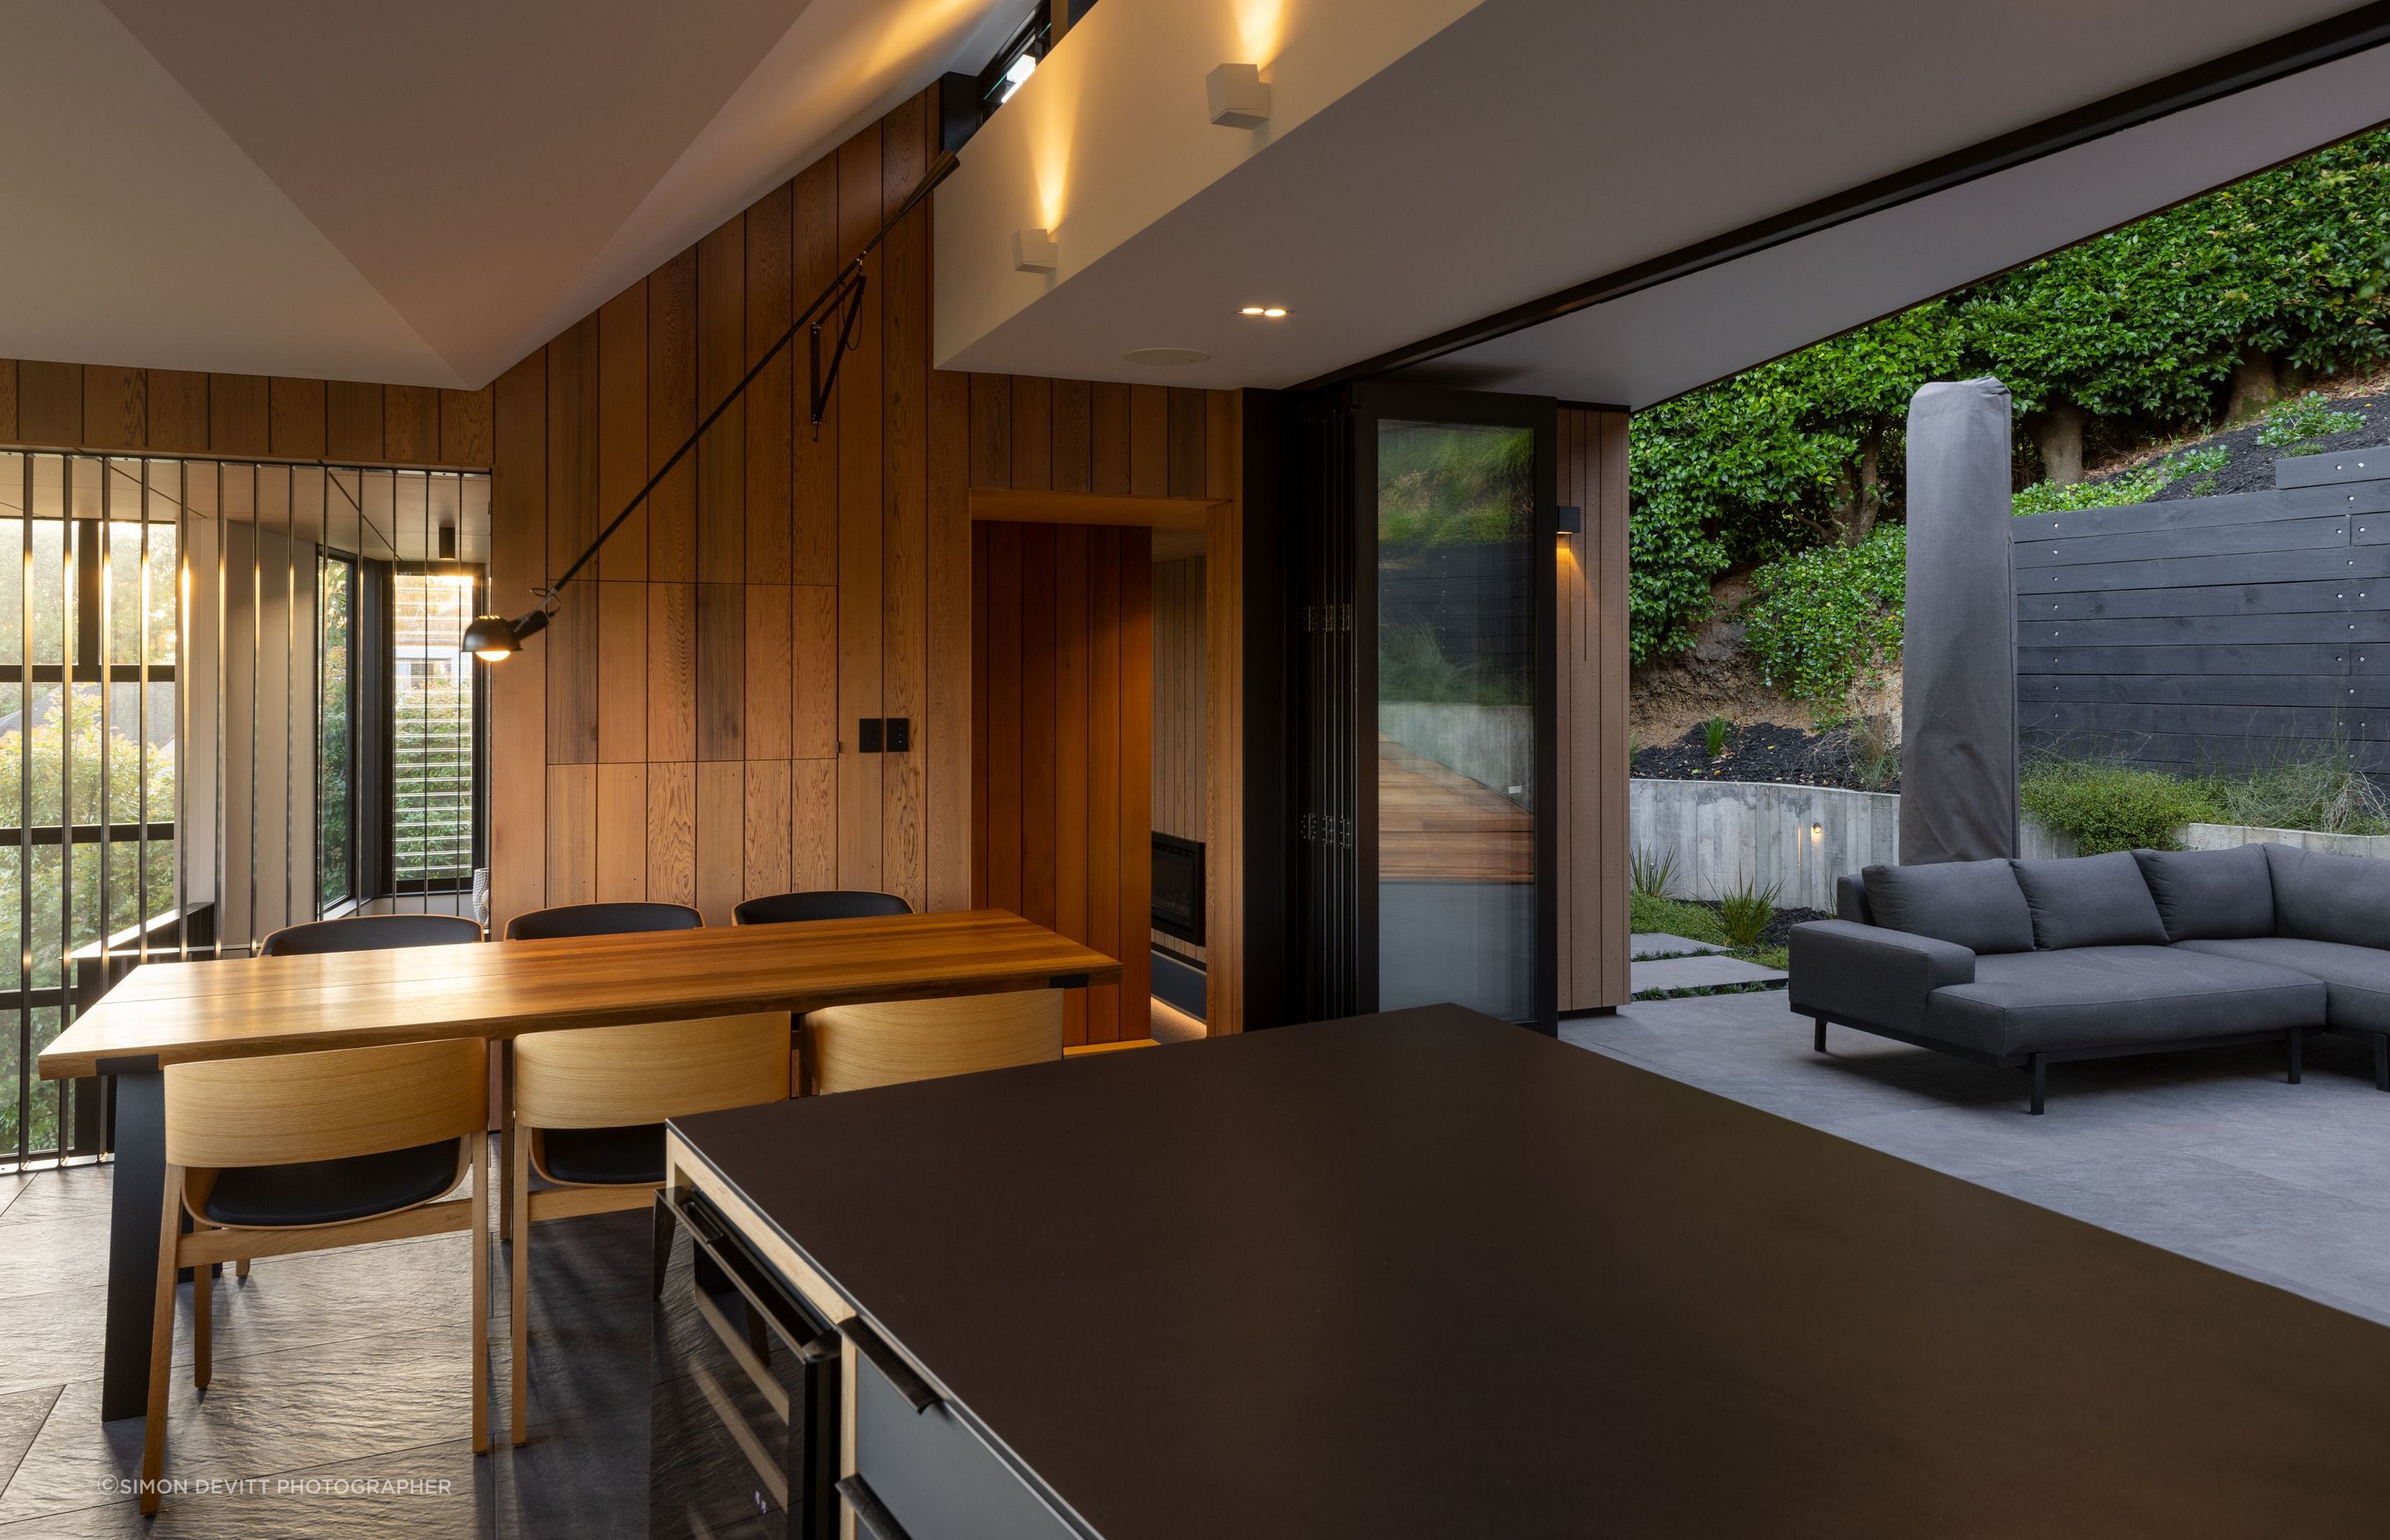 An interior open-plan kitchen and dining area flows seamlessly into an exterior space.